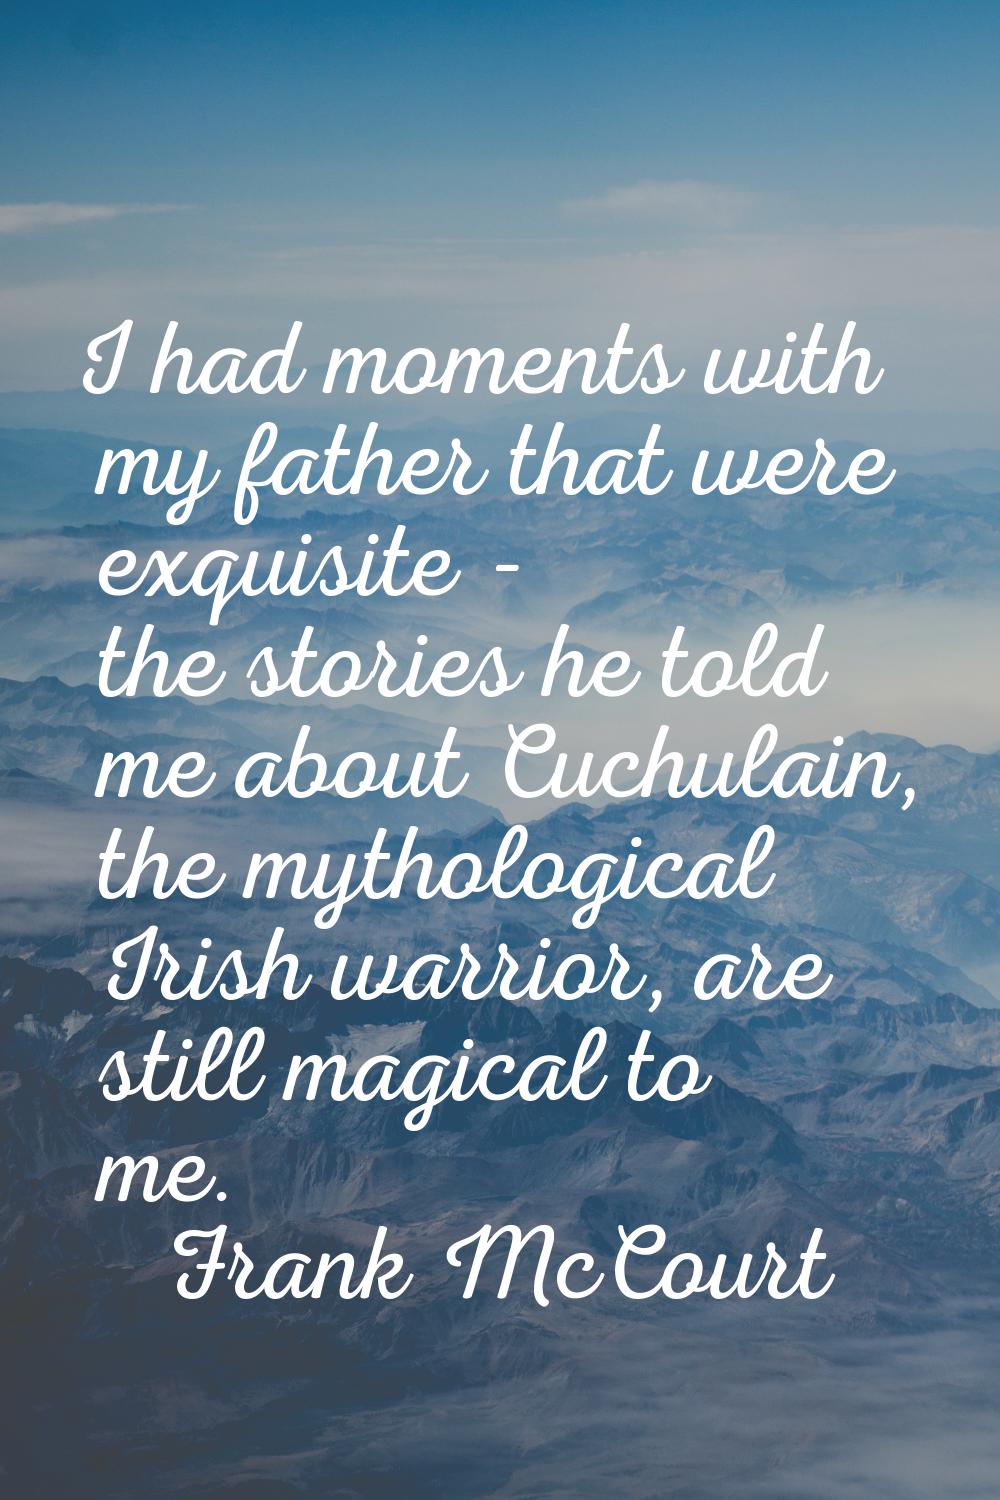 I had moments with my father that were exquisite - the stories he told me about Cuchulain, the myth